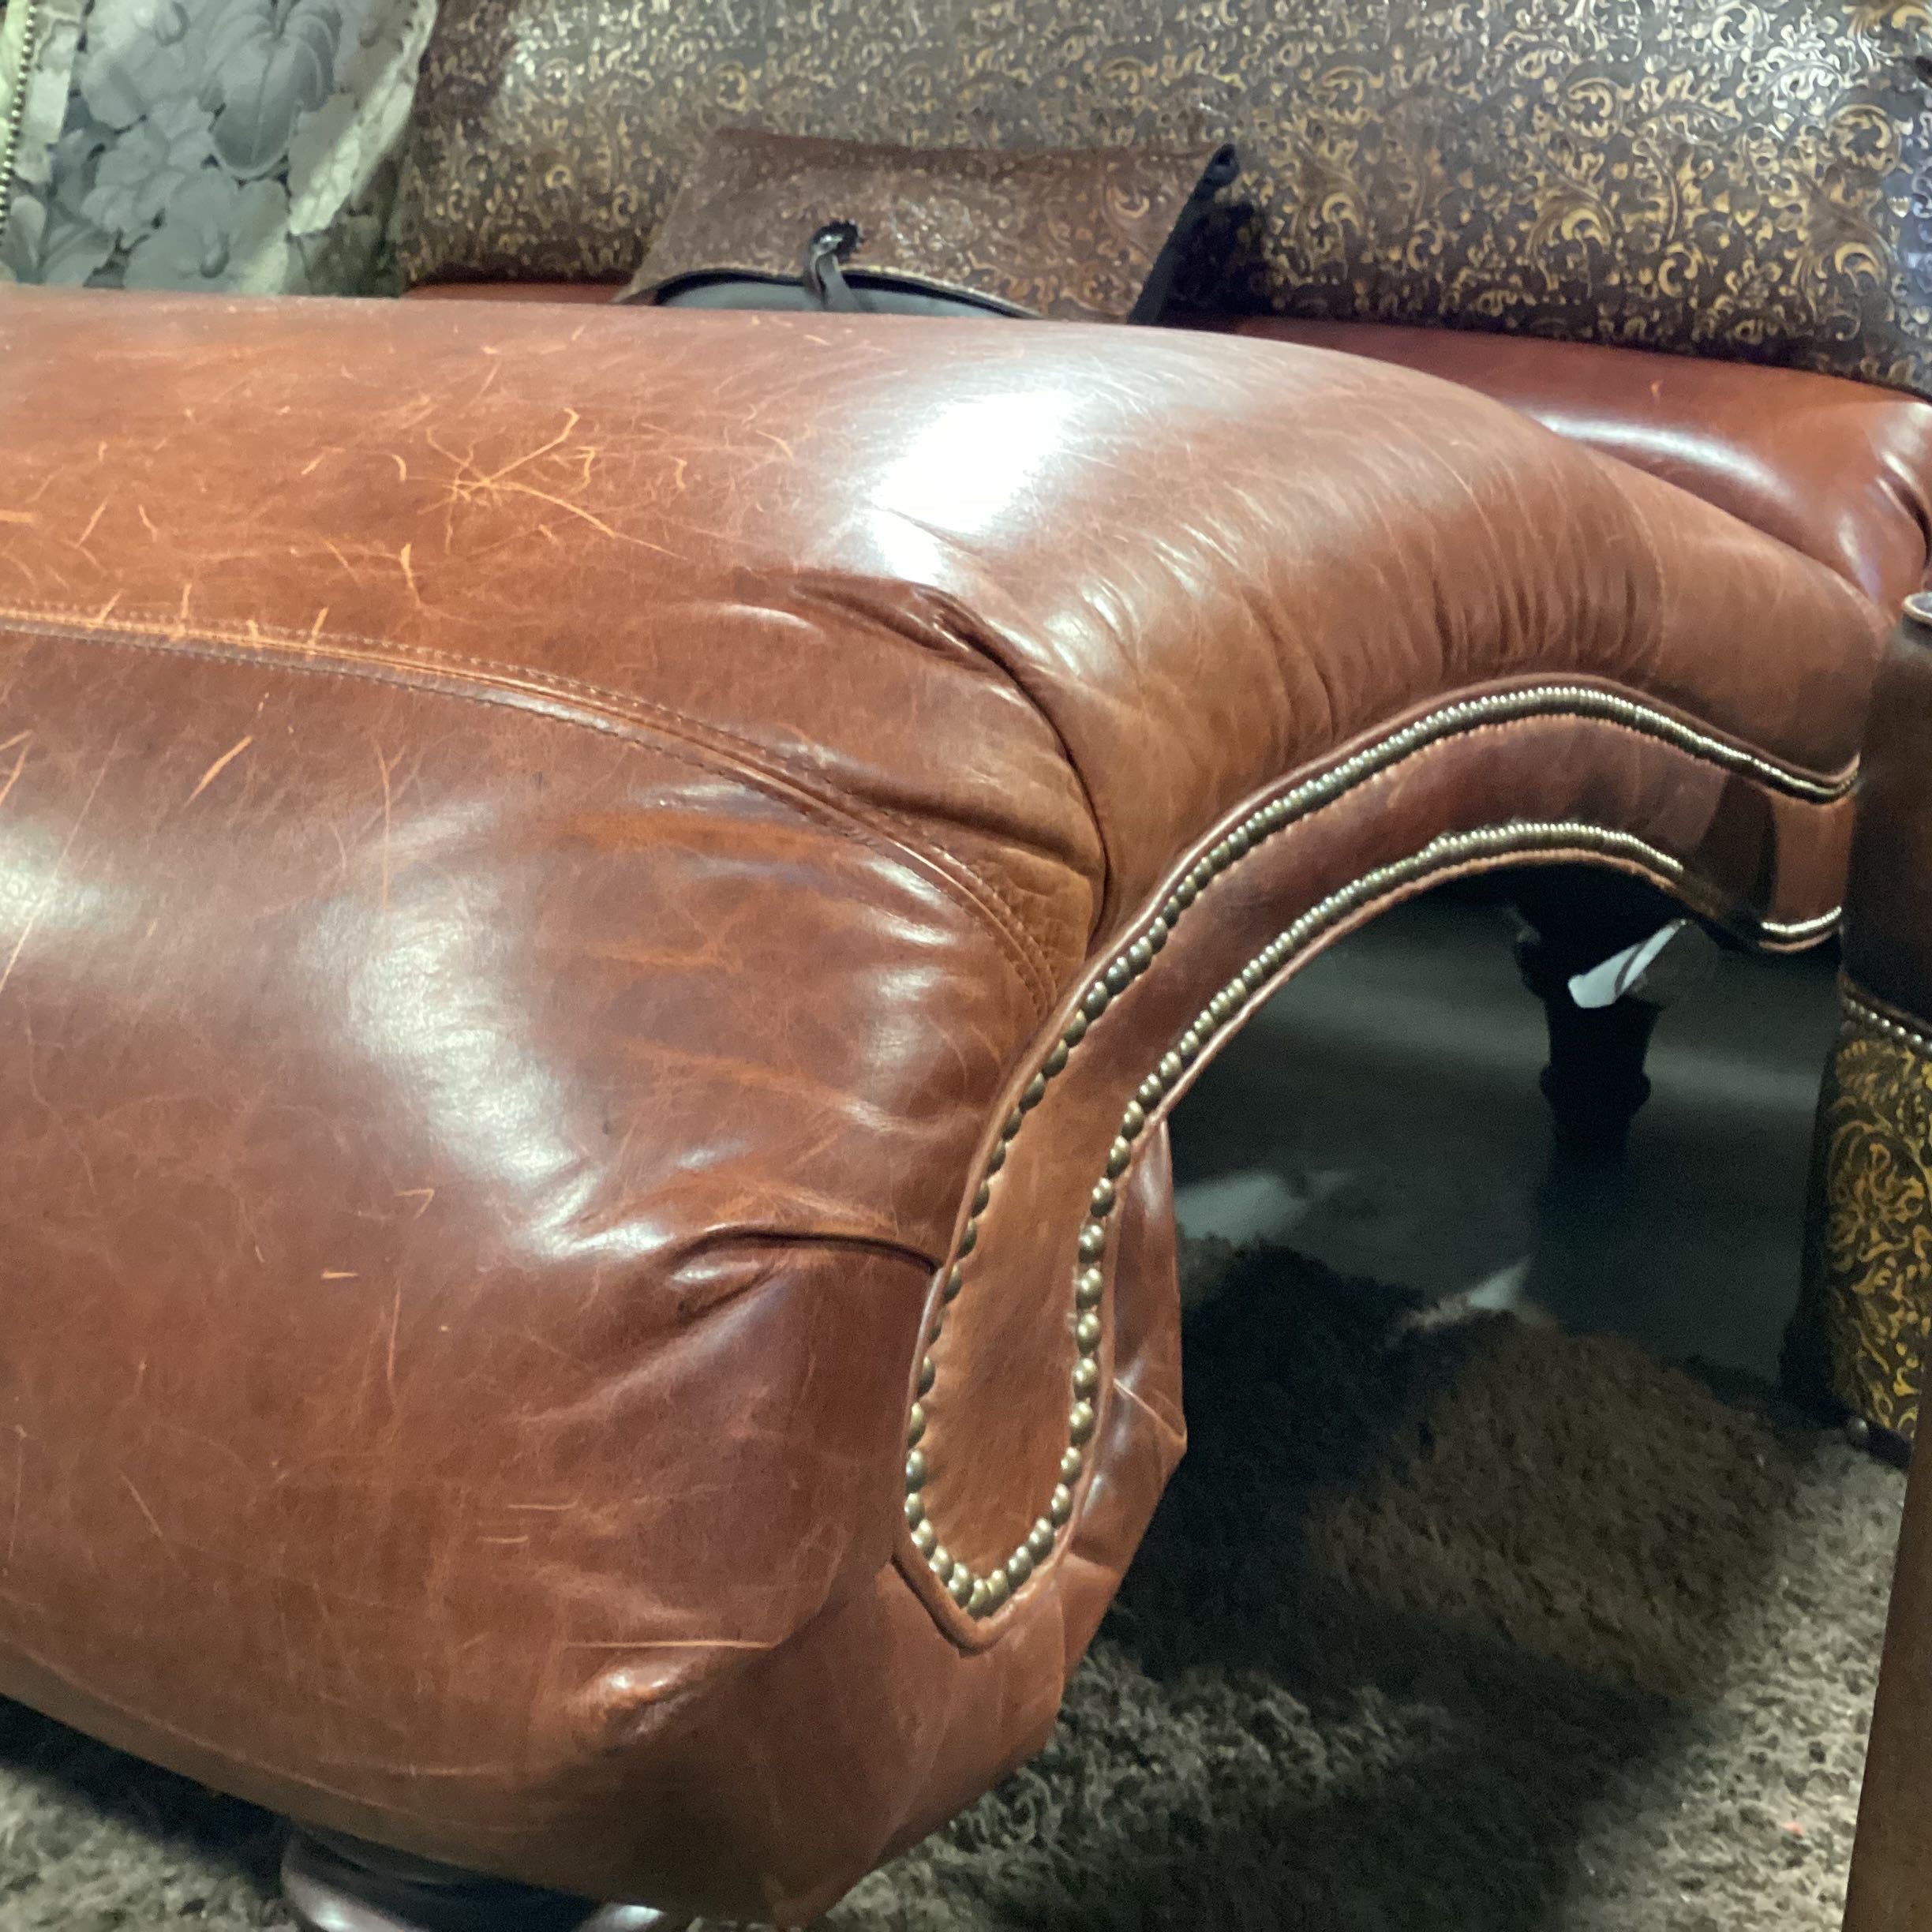 Hancock & Moore Tooled & Brown Leather Nailhead with Pillow Chaise Sofa